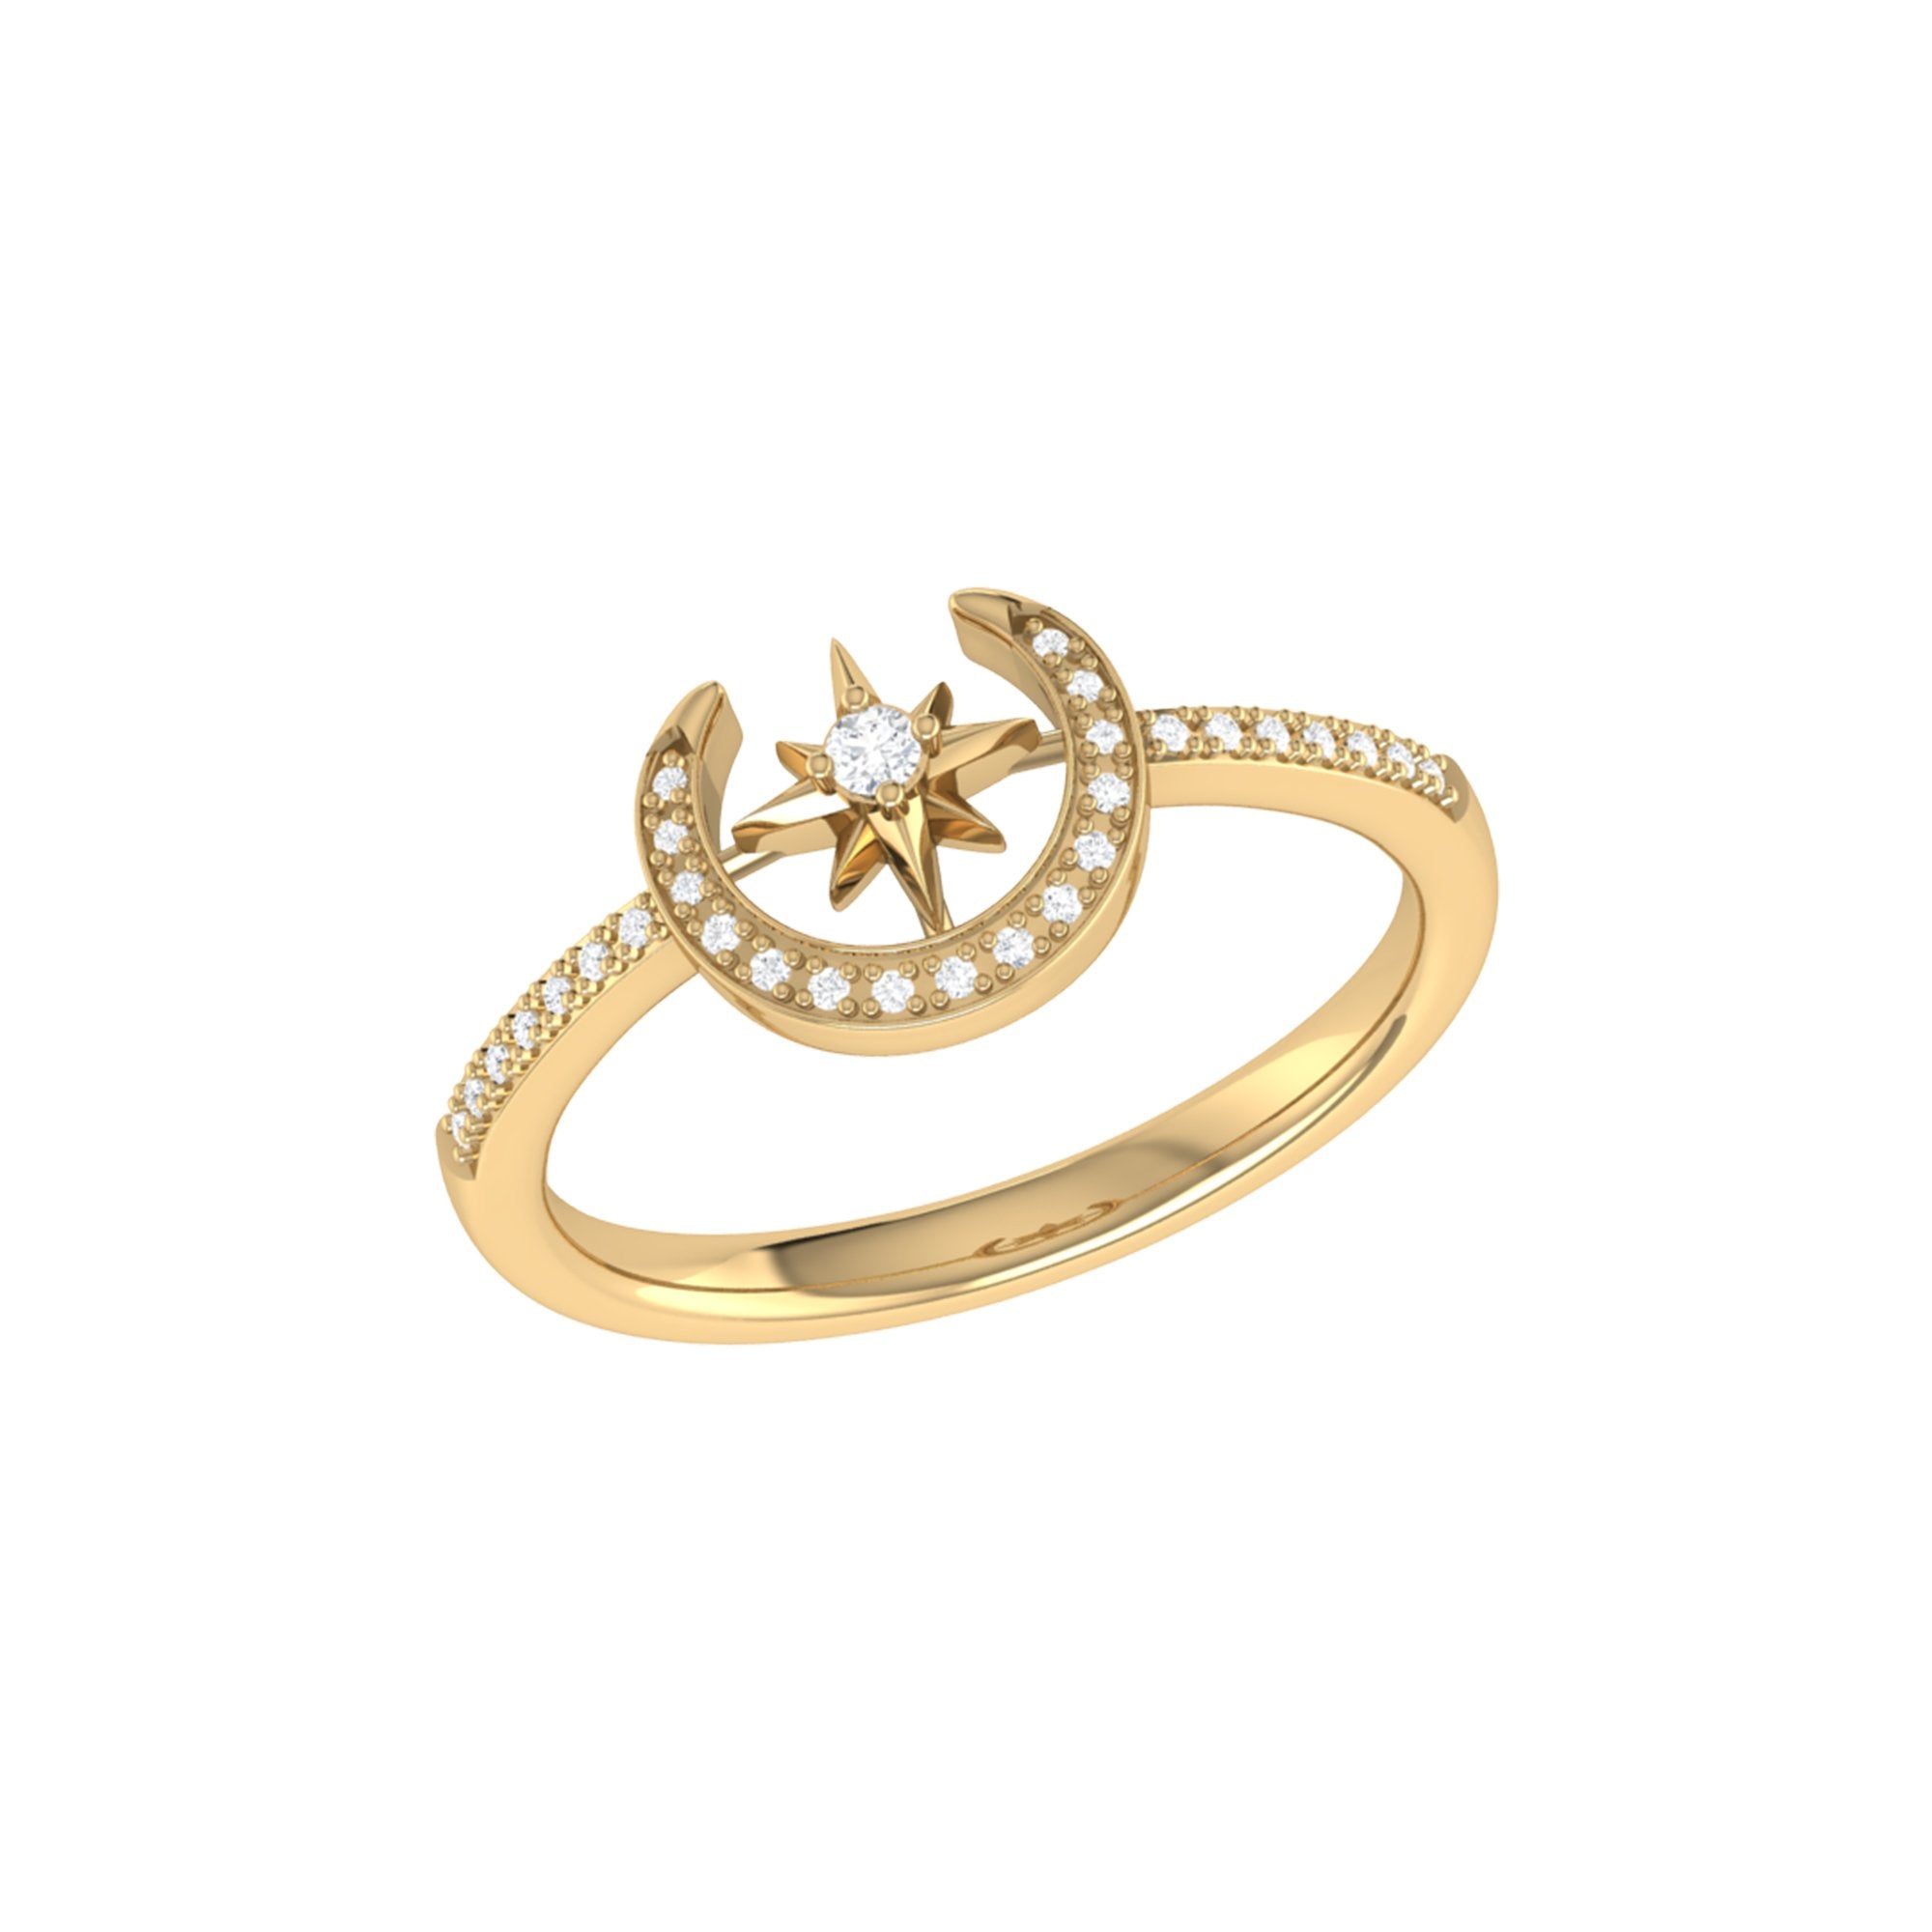 Crescent North Star Diamond Ring in 14K Yellow Gold Vermeil on Sterling Silver